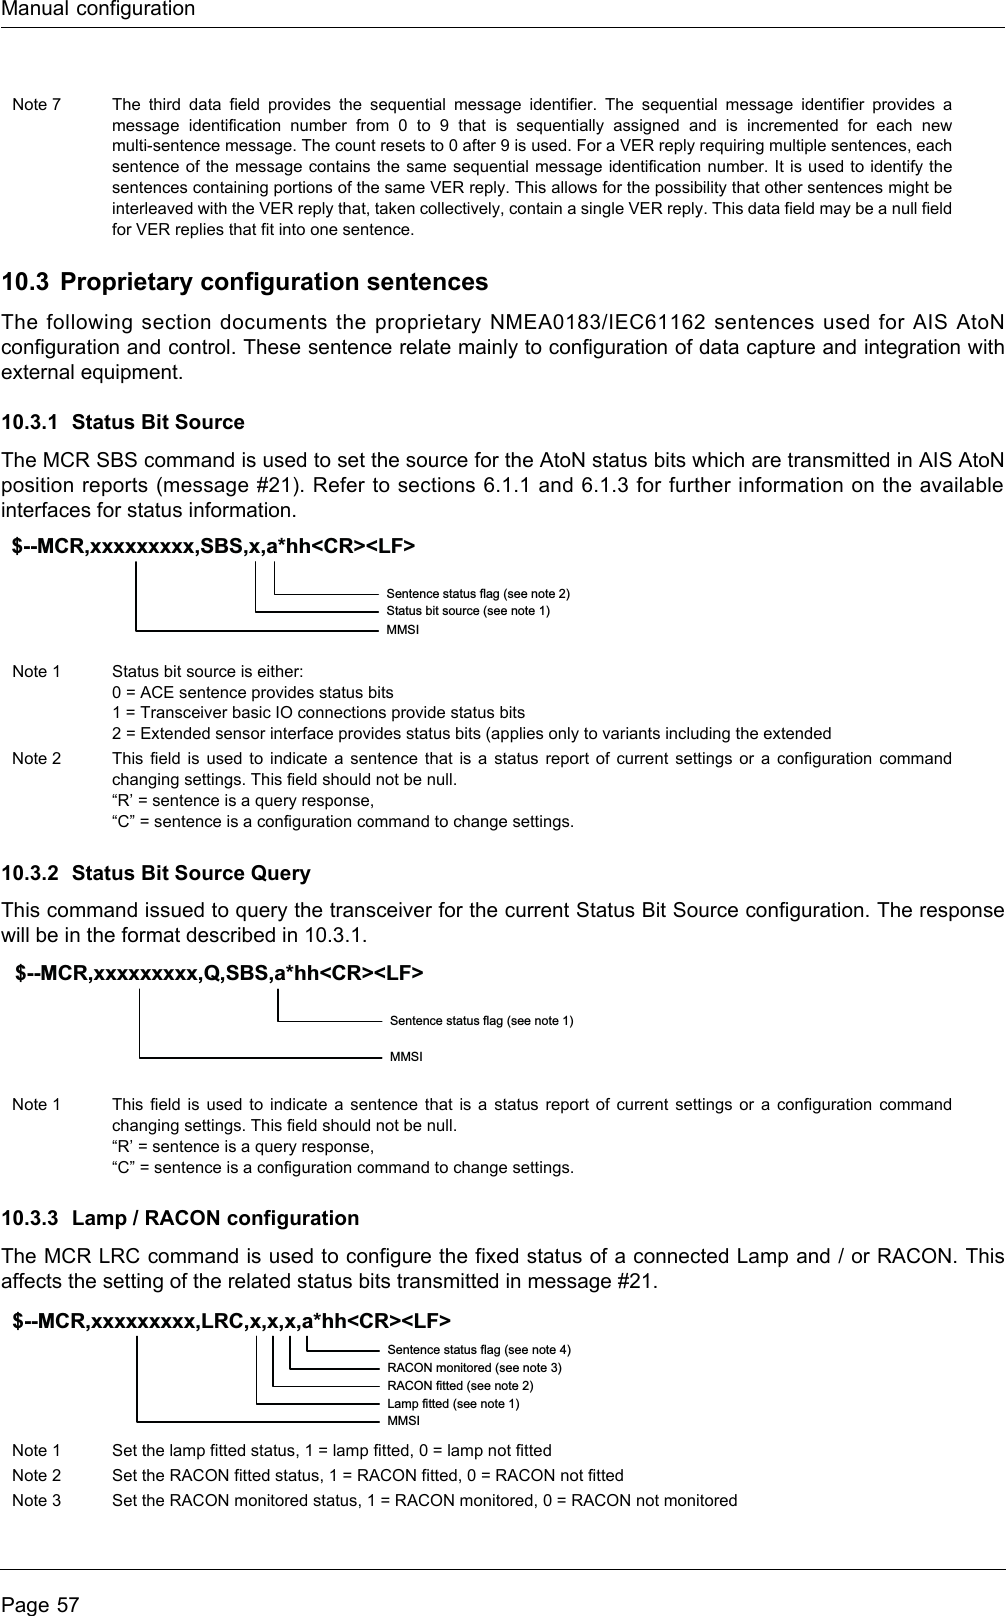 Manual configurationPage 5710.3 Proprietary configuration sentencesThe following section documents the proprietary NMEA0183/IEC61162 sentences used for AIS AtoN configuration and control. These sentence relate mainly to configuration of data capture and integration with external equipment.10.3.1 Status Bit Source The MCR SBS command is used to set the source for the AtoN status bits which are transmitted in AIS AtoN position reports (message #21). Refer to sections 6.1.1 and 6.1.3 for further information on the available interfaces for status information.10.3.2 Status Bit Source QueryThis command issued to query the transceiver for the current Status Bit Source configuration. The response will be in the format described in 10.3.1.10.3.3 Lamp / RACON configurationThe MCR LRC command is used to configure the fixed status of a connected Lamp and / or RACON. This affects the setting of the related status bits transmitted in message #21.Note 7 The third data field provides the sequential message identifier. The sequential message identifier provides a message identification number from 0 to 9 that is sequentially assigned and is incremented for each new multi-sentence message. The count resets to 0 after 9 is used. For a VER reply requiring multiple sentences, each sentence of the message contains the same sequential message identification number. It is used to identify the sentences containing portions of the same VER reply. This allows for the possibility that other sentences might be interleaved with the VER reply that, taken collectively, contain a single VER reply. This data field may be a null field for VER replies that fit into one sentence.Note 1 Status bit source is either:0 = ACE sentence provides status bits1 = Transceiver basic IO connections provide status bits2 = Extended sensor interface provides status bits (applies only to variants including the extendedNote 2 This field is used to indicate a sentence that is a status report of current settings or a configuration command changing settings. This field should not be null.“R’ = sentence is a query response,“C” = sentence is a configuration command to change settings.Note 1 This field is used to indicate a sentence that is a status report of current settings or a configuration command changing settings. This field should not be null.“R’ = sentence is a query response,“C” = sentence is a configuration command to change settings.Note 1 Set the lamp fitted status, 1 = lamp fitted, 0 = lamp not fittedNote 2 Set the RACON fitted status, 1 = RACON fitted, 0 = RACON not fittedNote 3 Set the RACON monitored status, 1 = RACON monitored, 0 = RACON not monitoredSentence status flag (see note 2)Status bit source (see note 1)MMSI$--MCR,xxxxxxxxx,SBS,x,a*hh&lt;CR&gt;&lt;LF&gt;Sentence status flag (see note 1)MMSI$--MCR,xxxxxxxxx,Q,SBS,a*hh&lt;CR&gt;&lt;LF&gt;Sentence status flag (see note 4)RACON monitored (see note 3)RACON fitted (see note 2)Lamp fitted (see note 1)MMSI$--MCR,xxxxxxxxx,LRC,x,x,x,a*hh&lt;CR&gt;&lt;LF&gt;